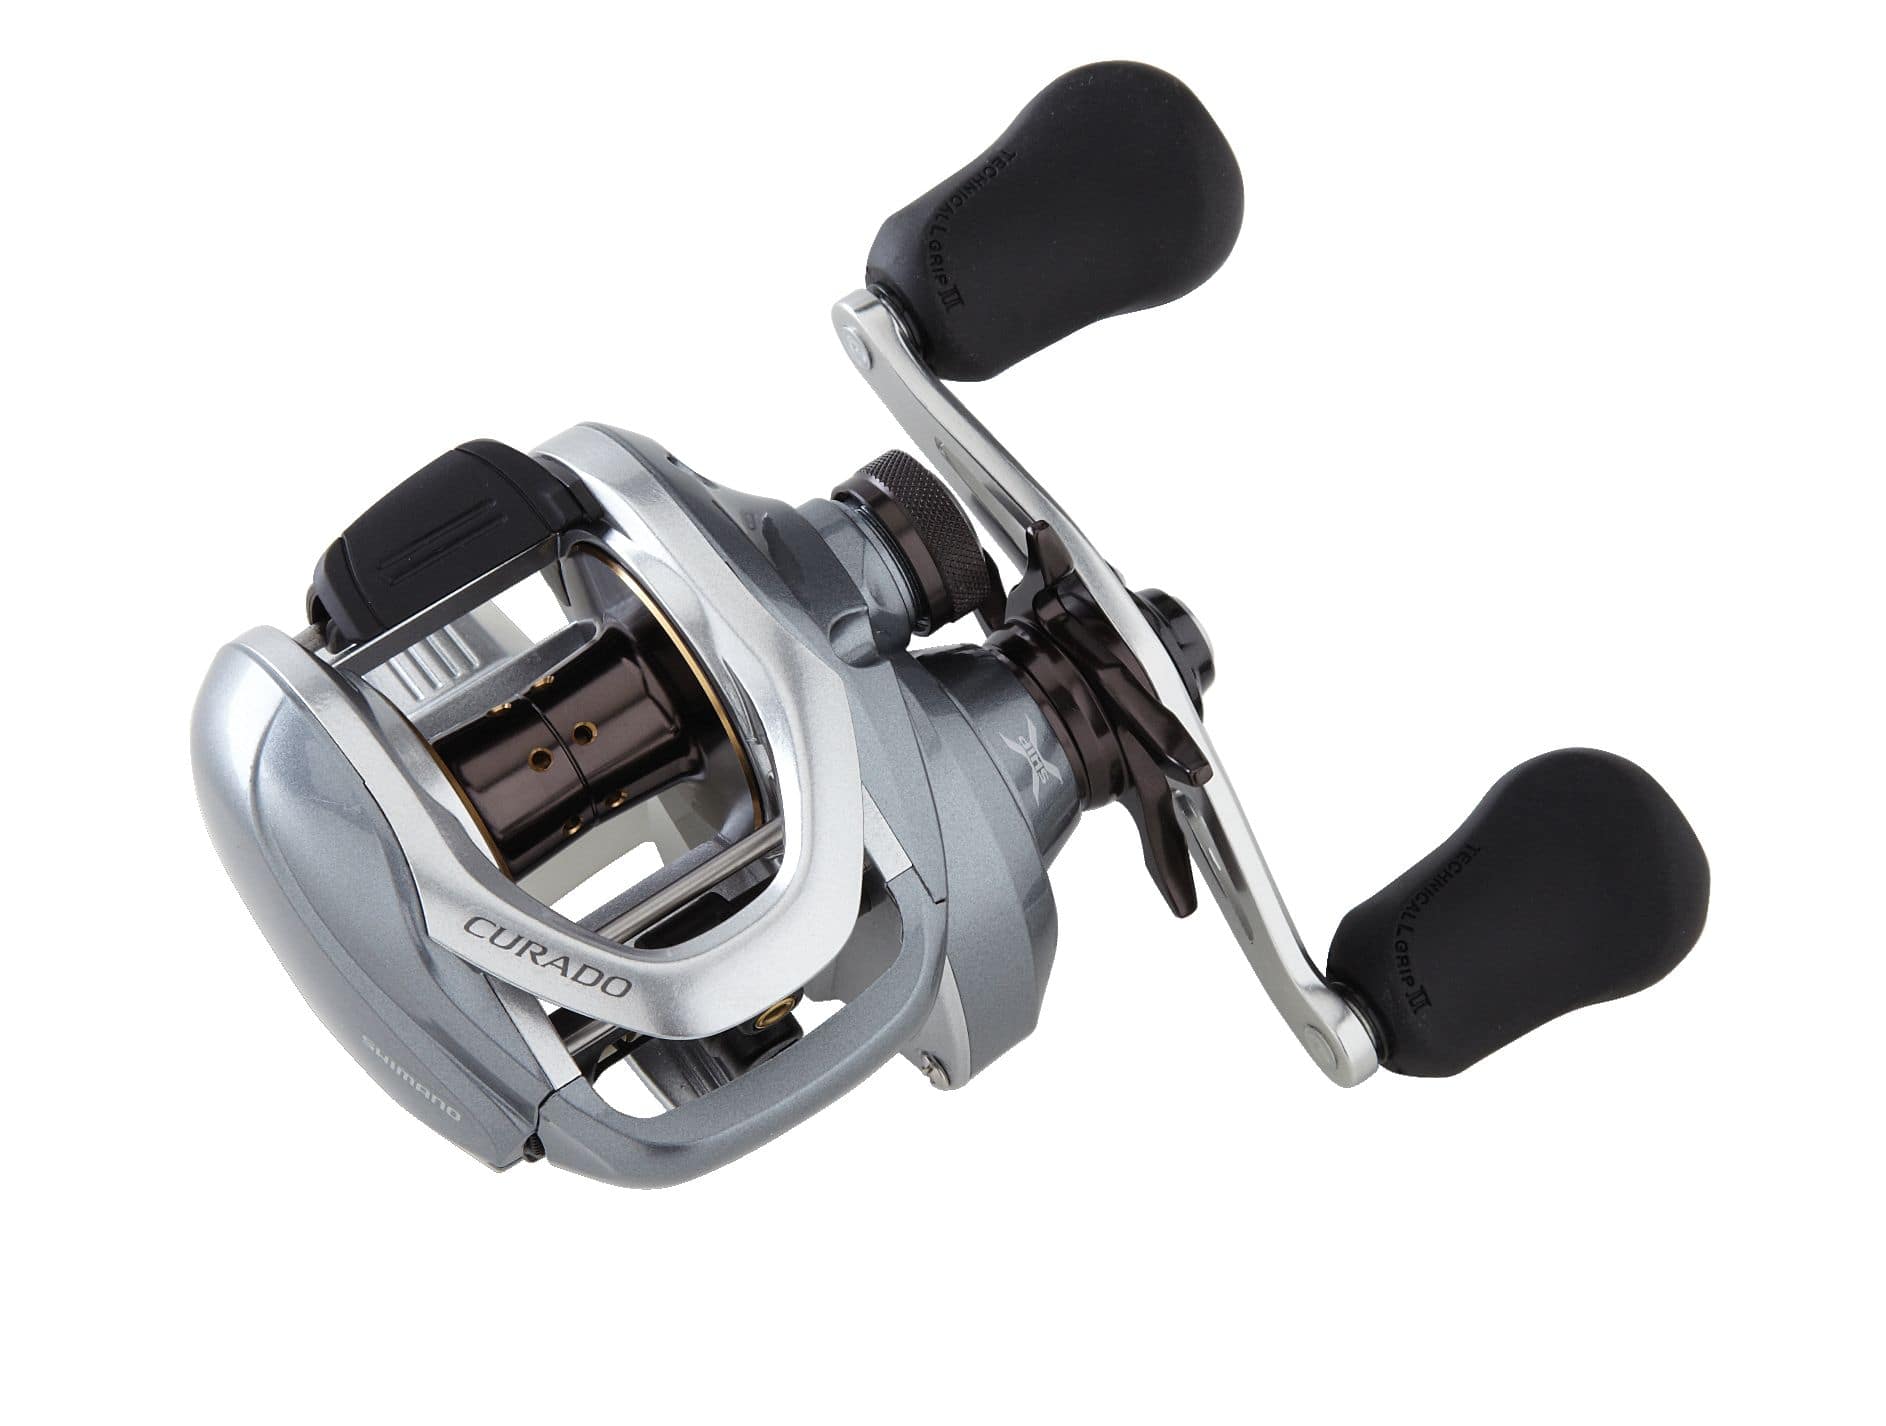 Baitcasting Reel, Convenient Dual Brakes Lure Fishing Reel For All Waters  Left Handed